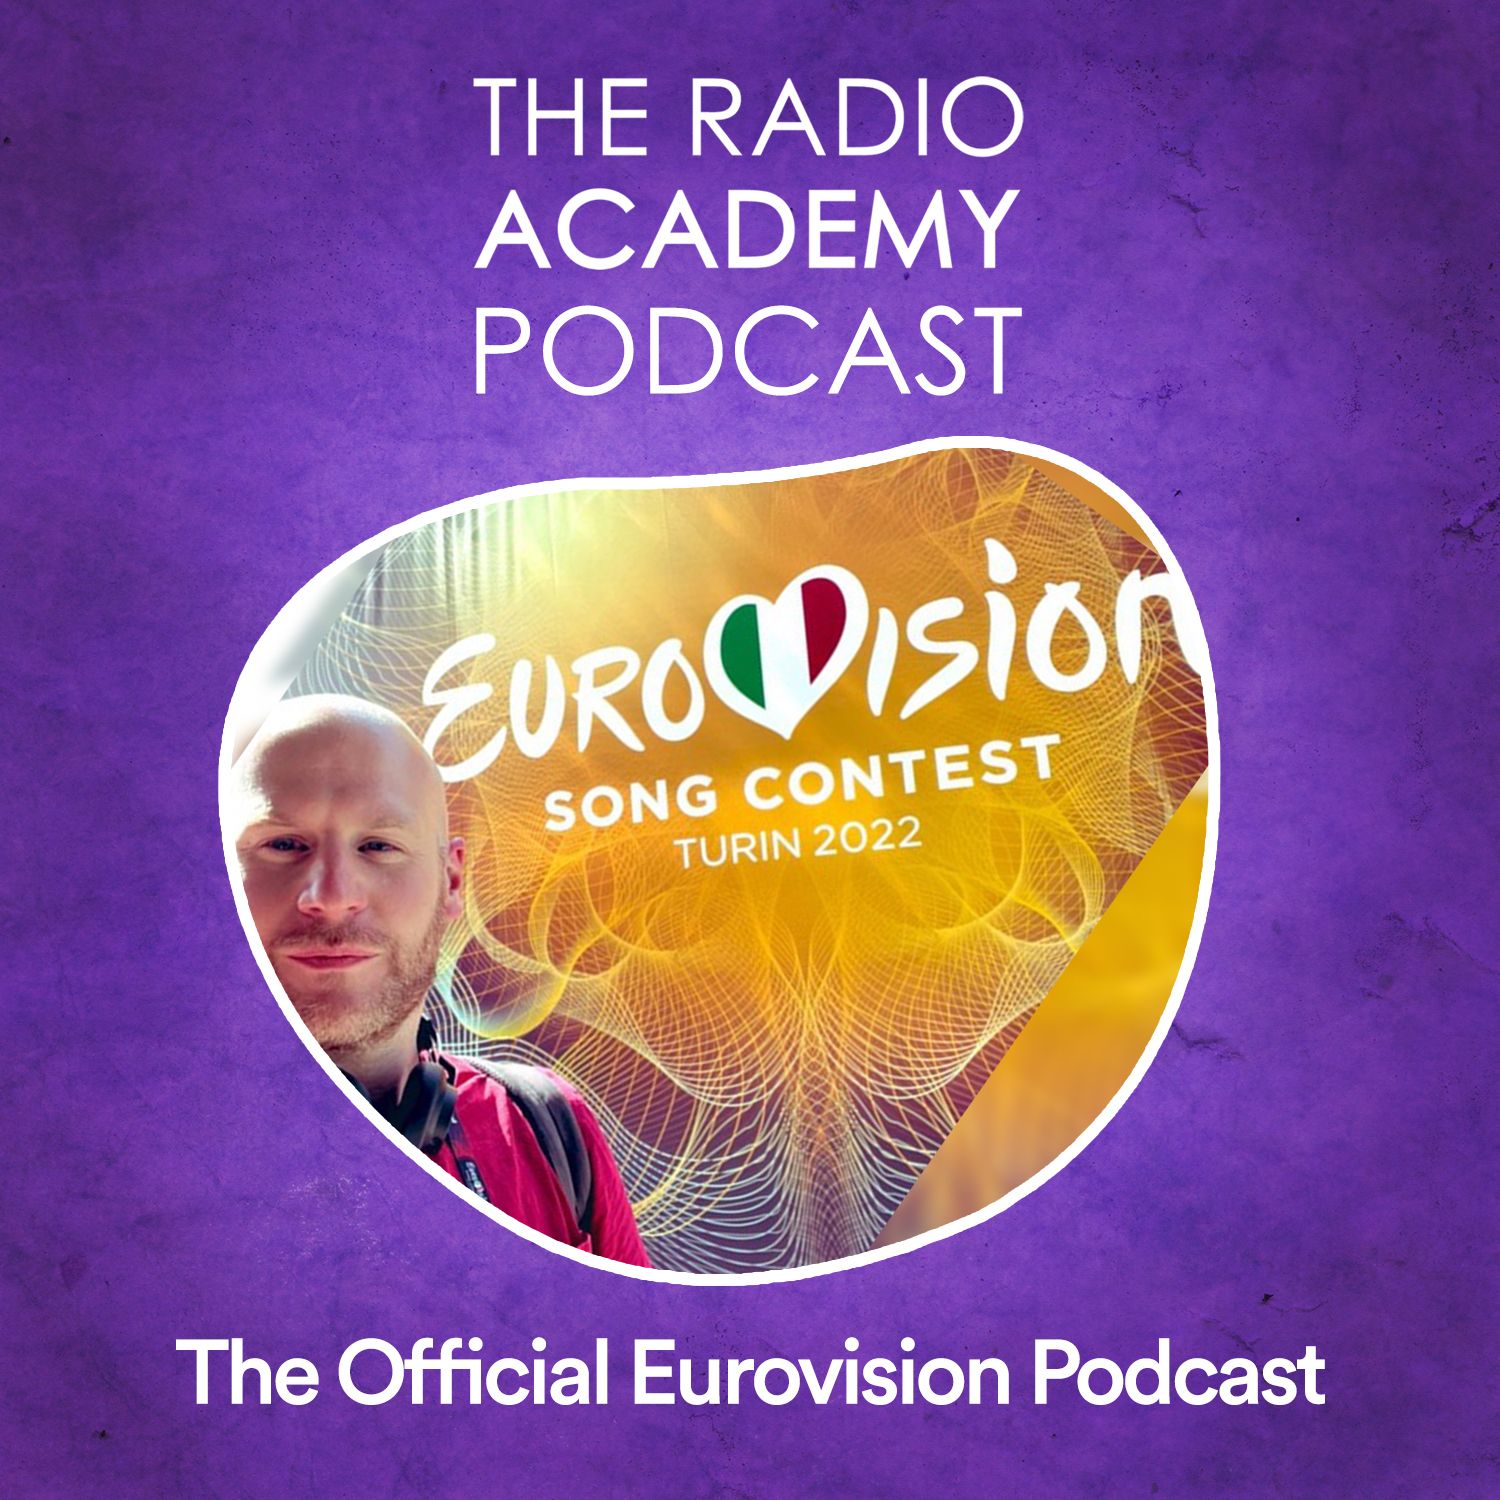 The Radio Academy Podcast / Official Eurovision Podcast